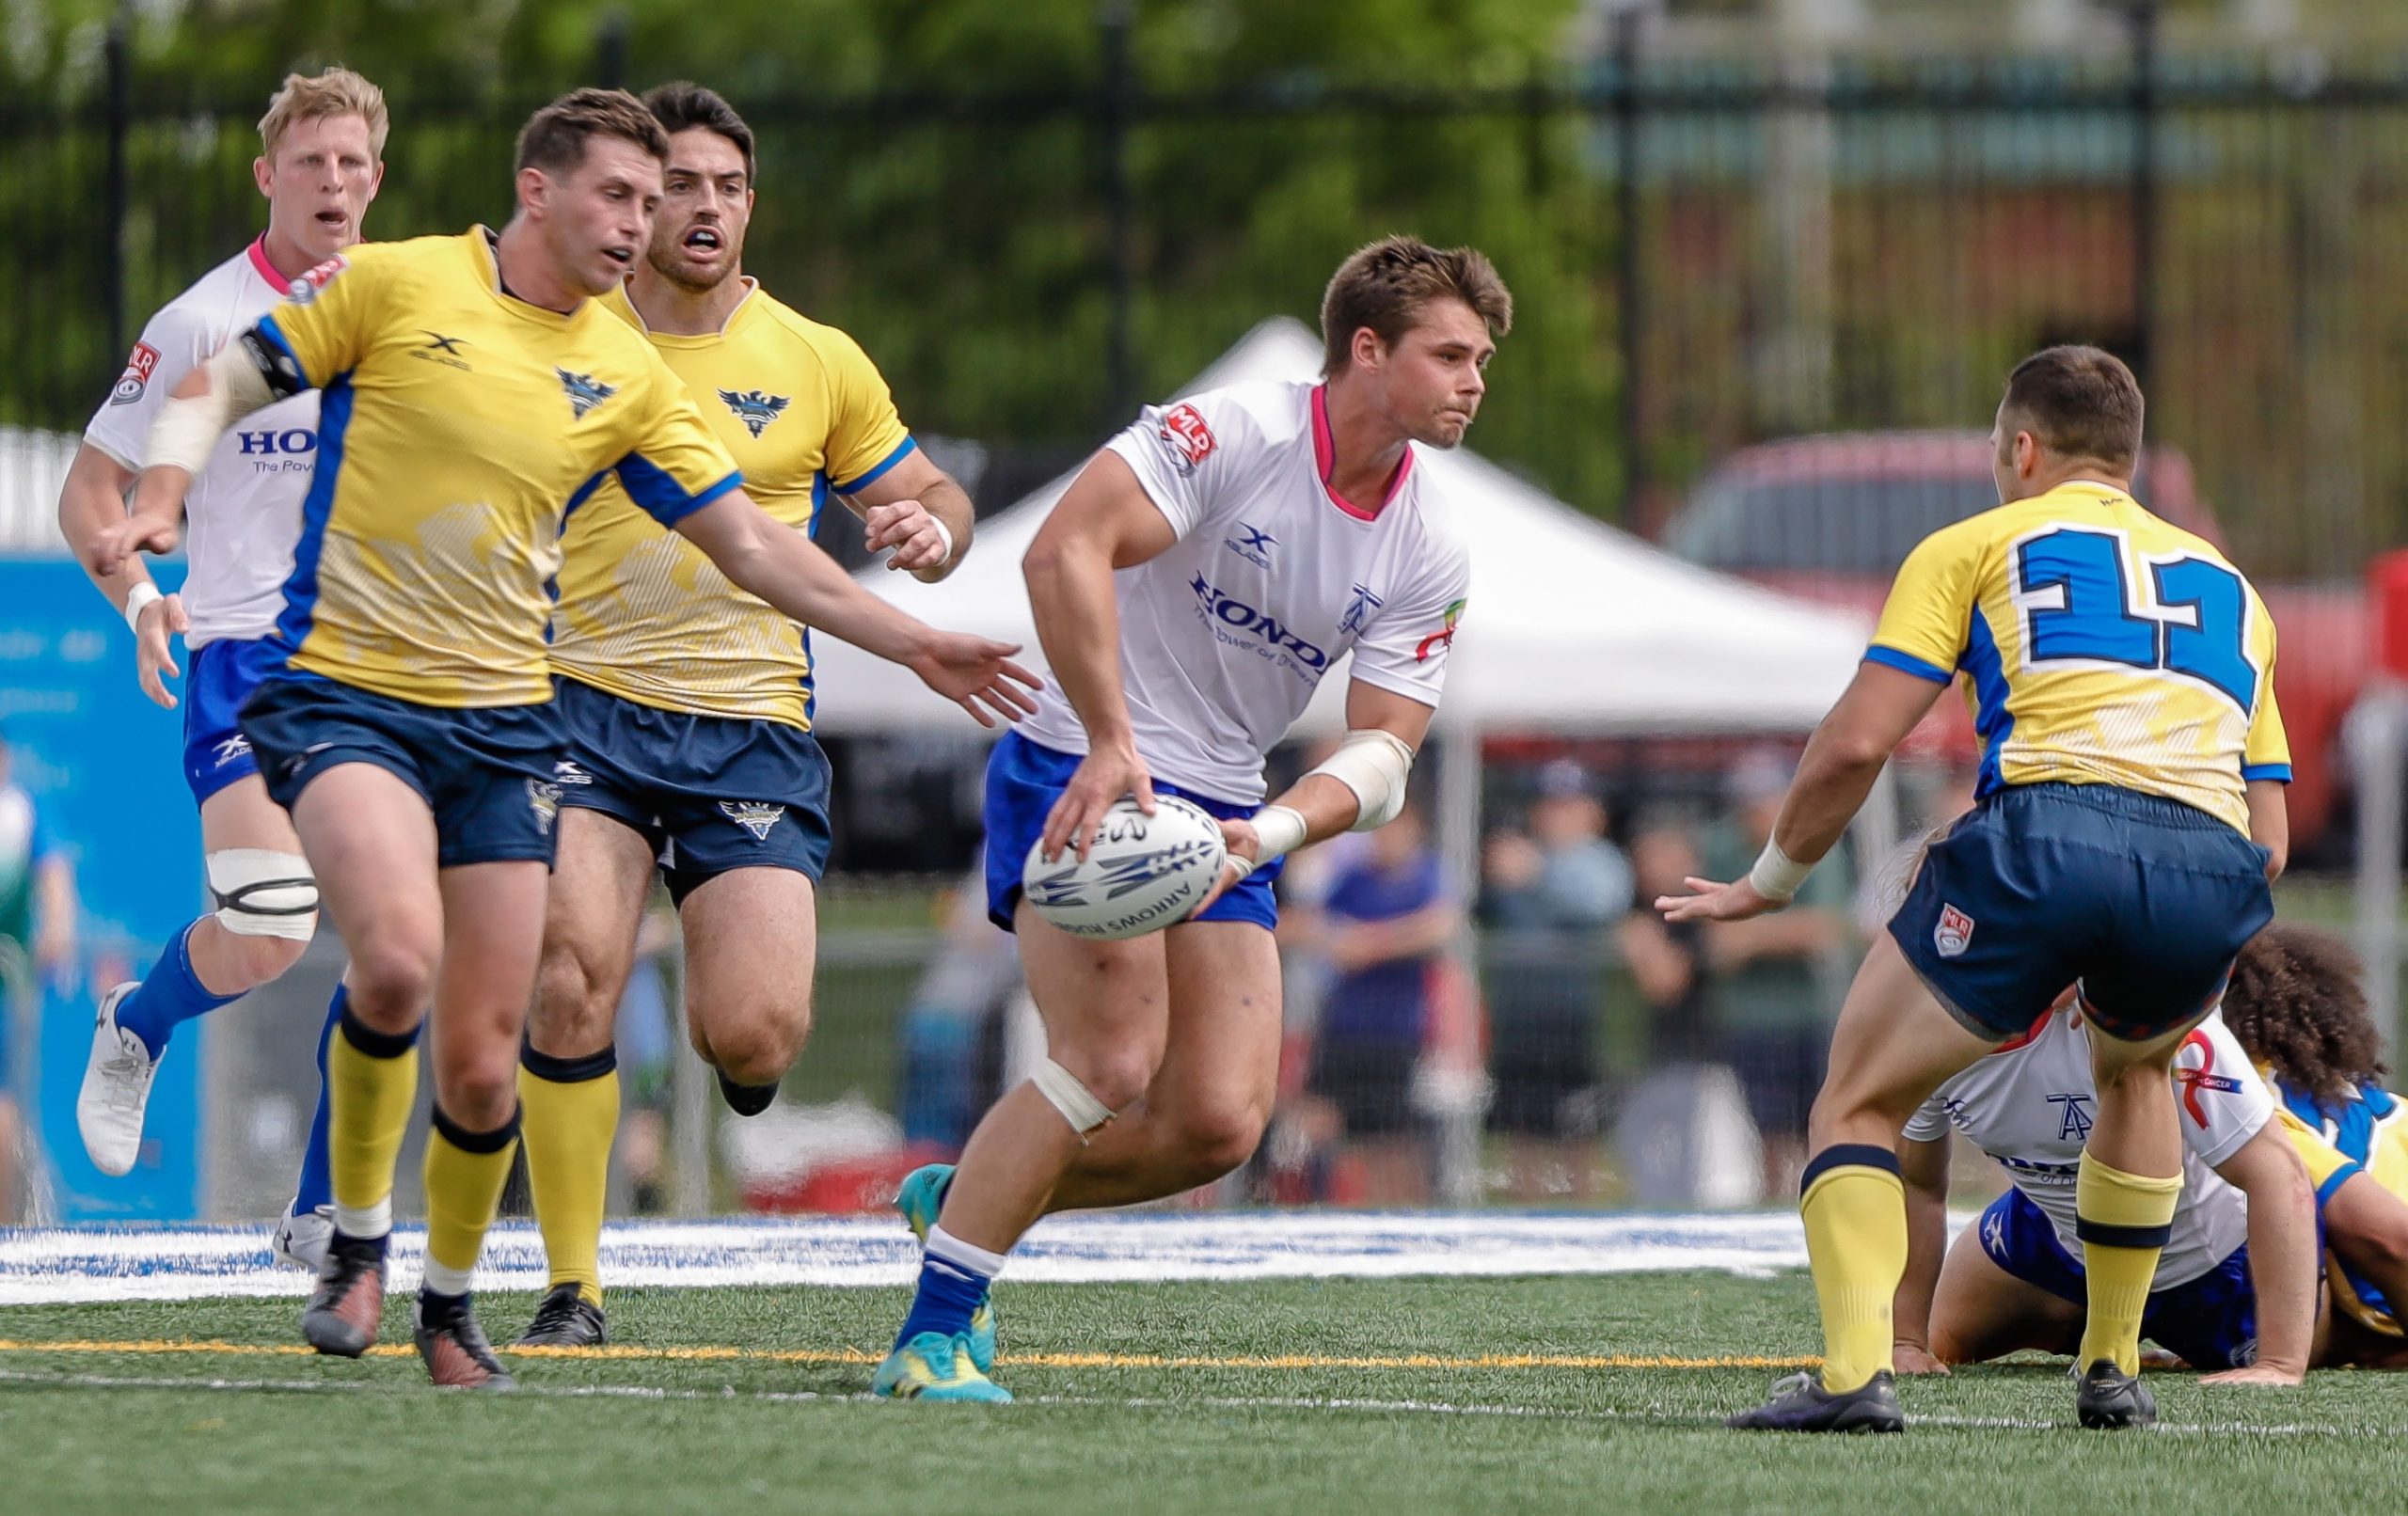 Twelve Arrows Named to Canada’s Rugby World Cup Long List